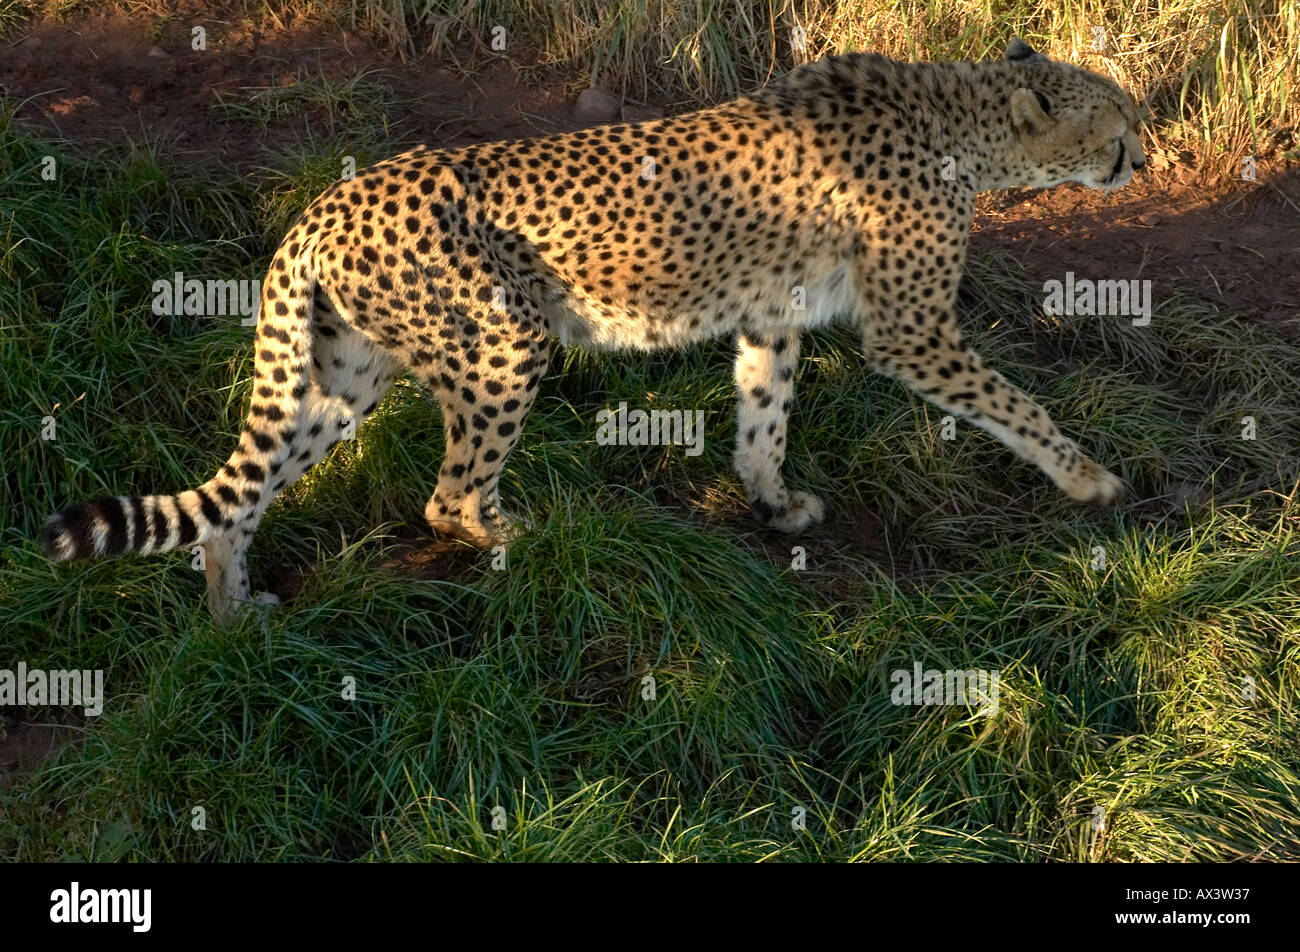 A big cat cheetah stalking prey through the undergrowth The fastest land mammal on earth Stock Photo